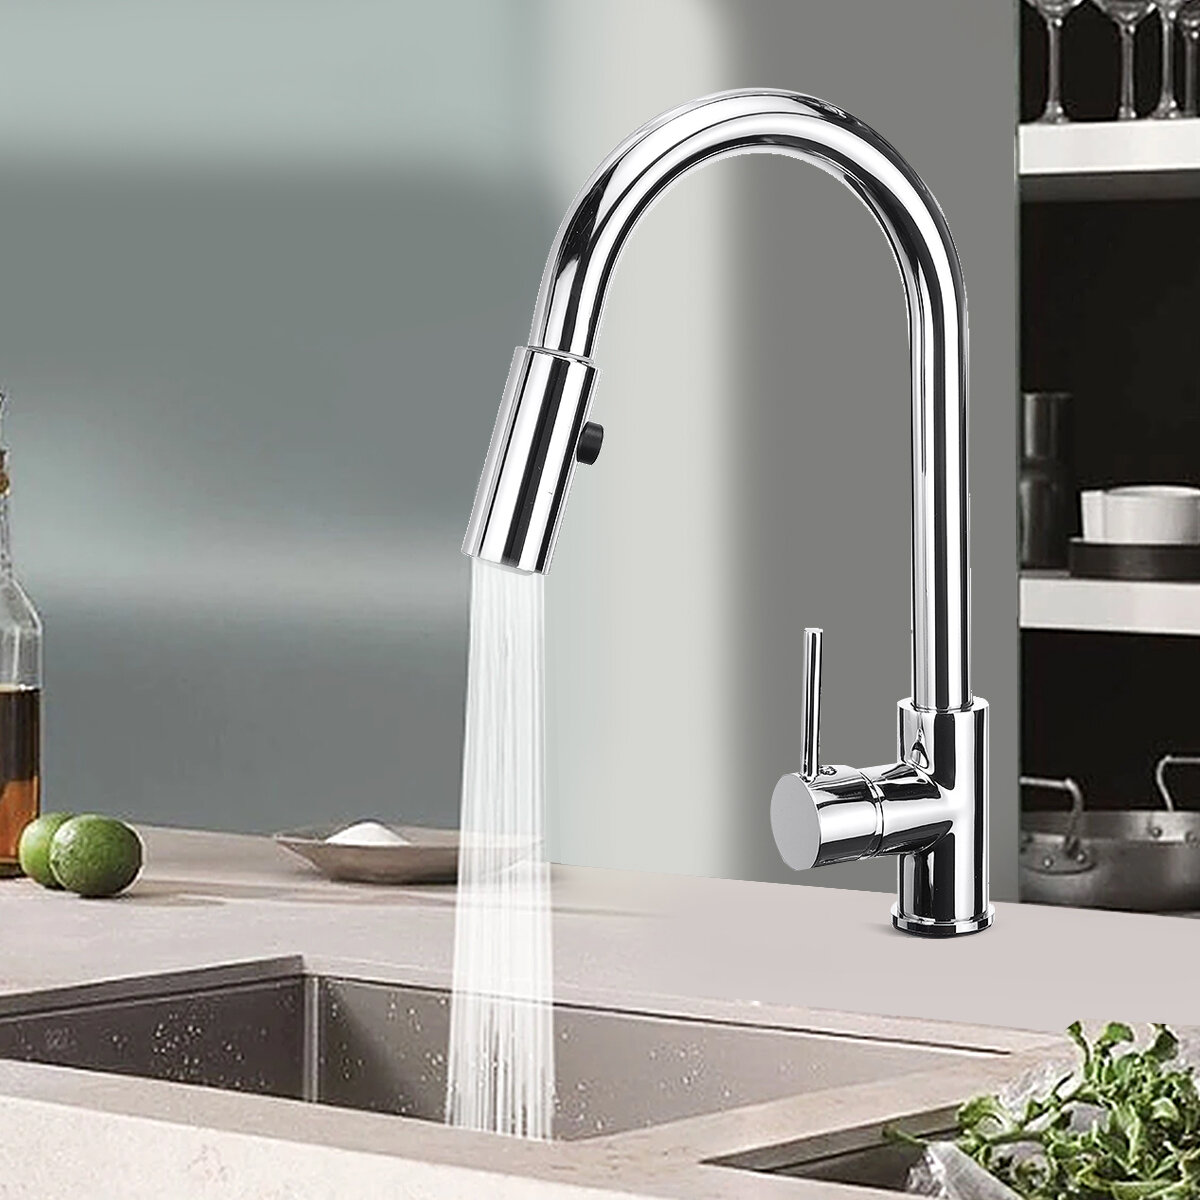 Image of Modern Kitchen Sink Faucet with Pull Down Sprayer Single Handle Hot Cold Mixer Tap